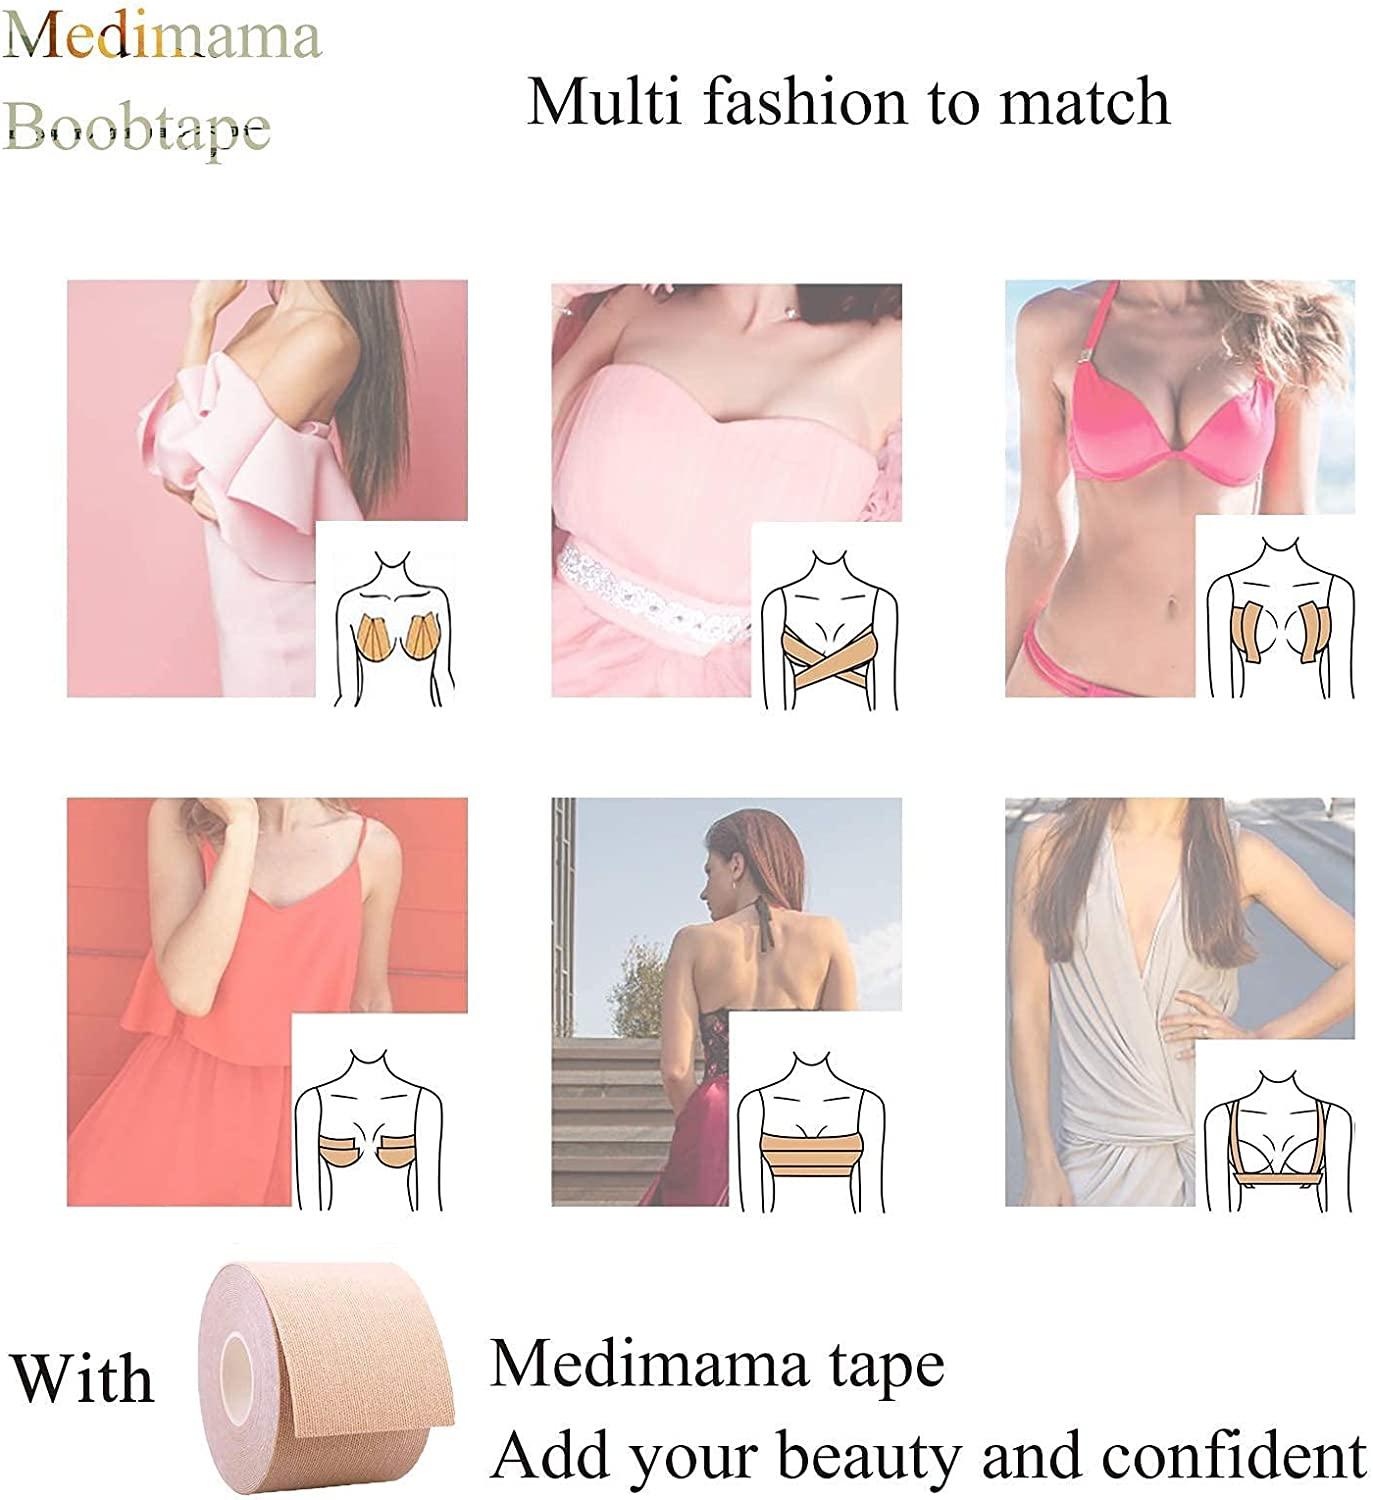 2 Rolls Boob Tape, Black And Skin Color Self Adhesive Push Up